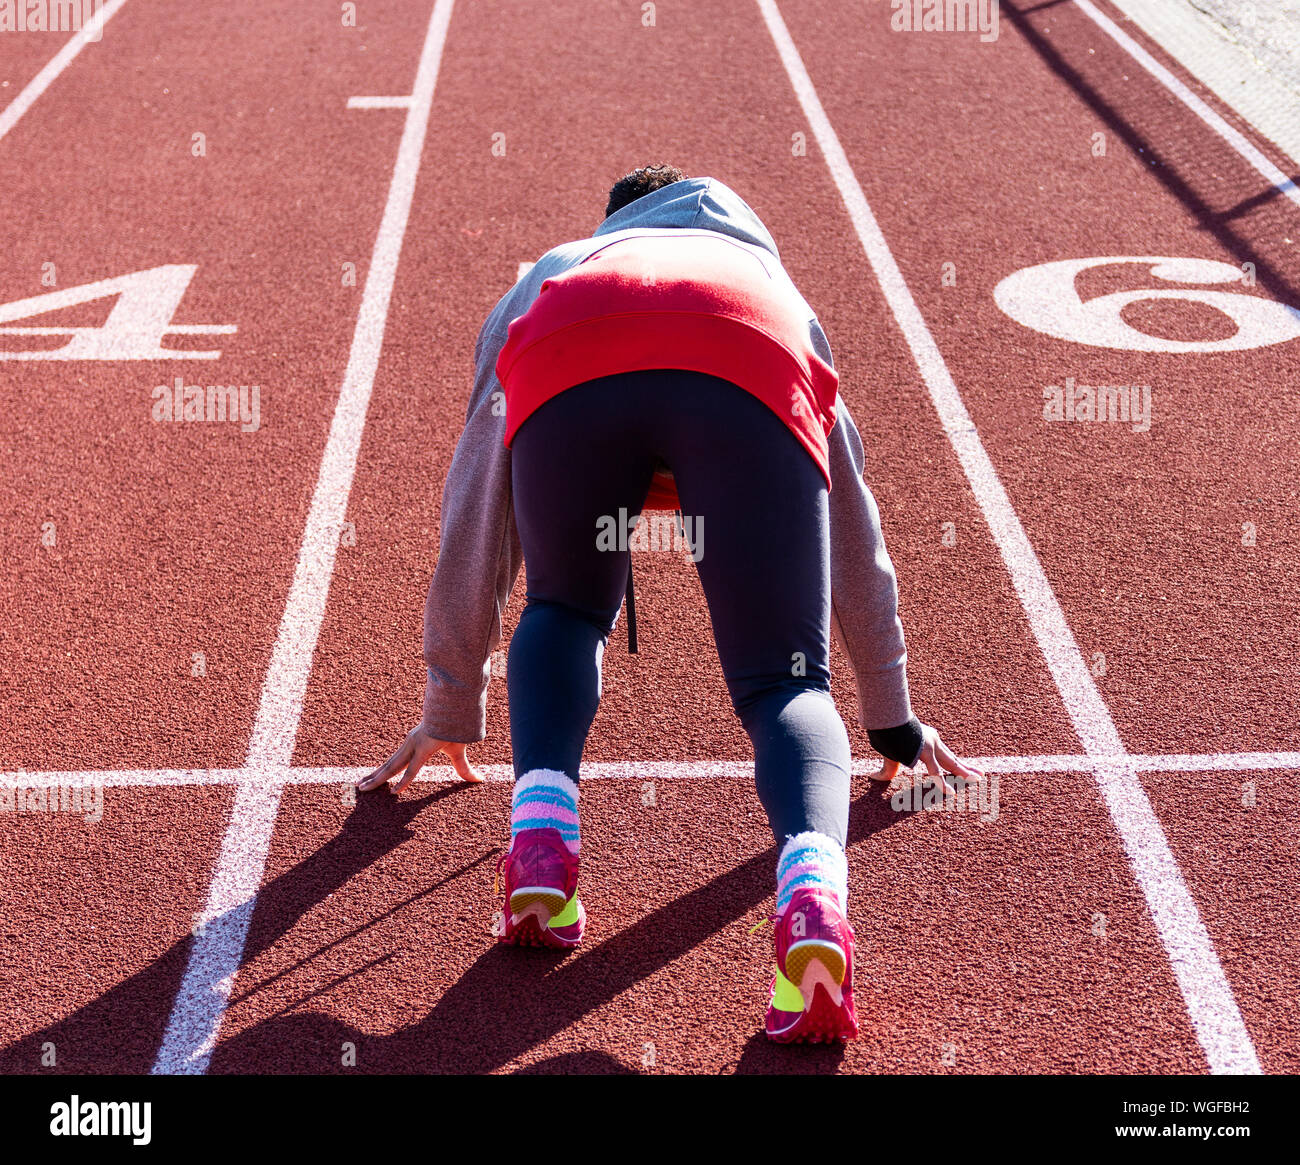 A high school teenage girl is in the set position ready to sprint down the straightway of a track during track and field practice. Stock Photo